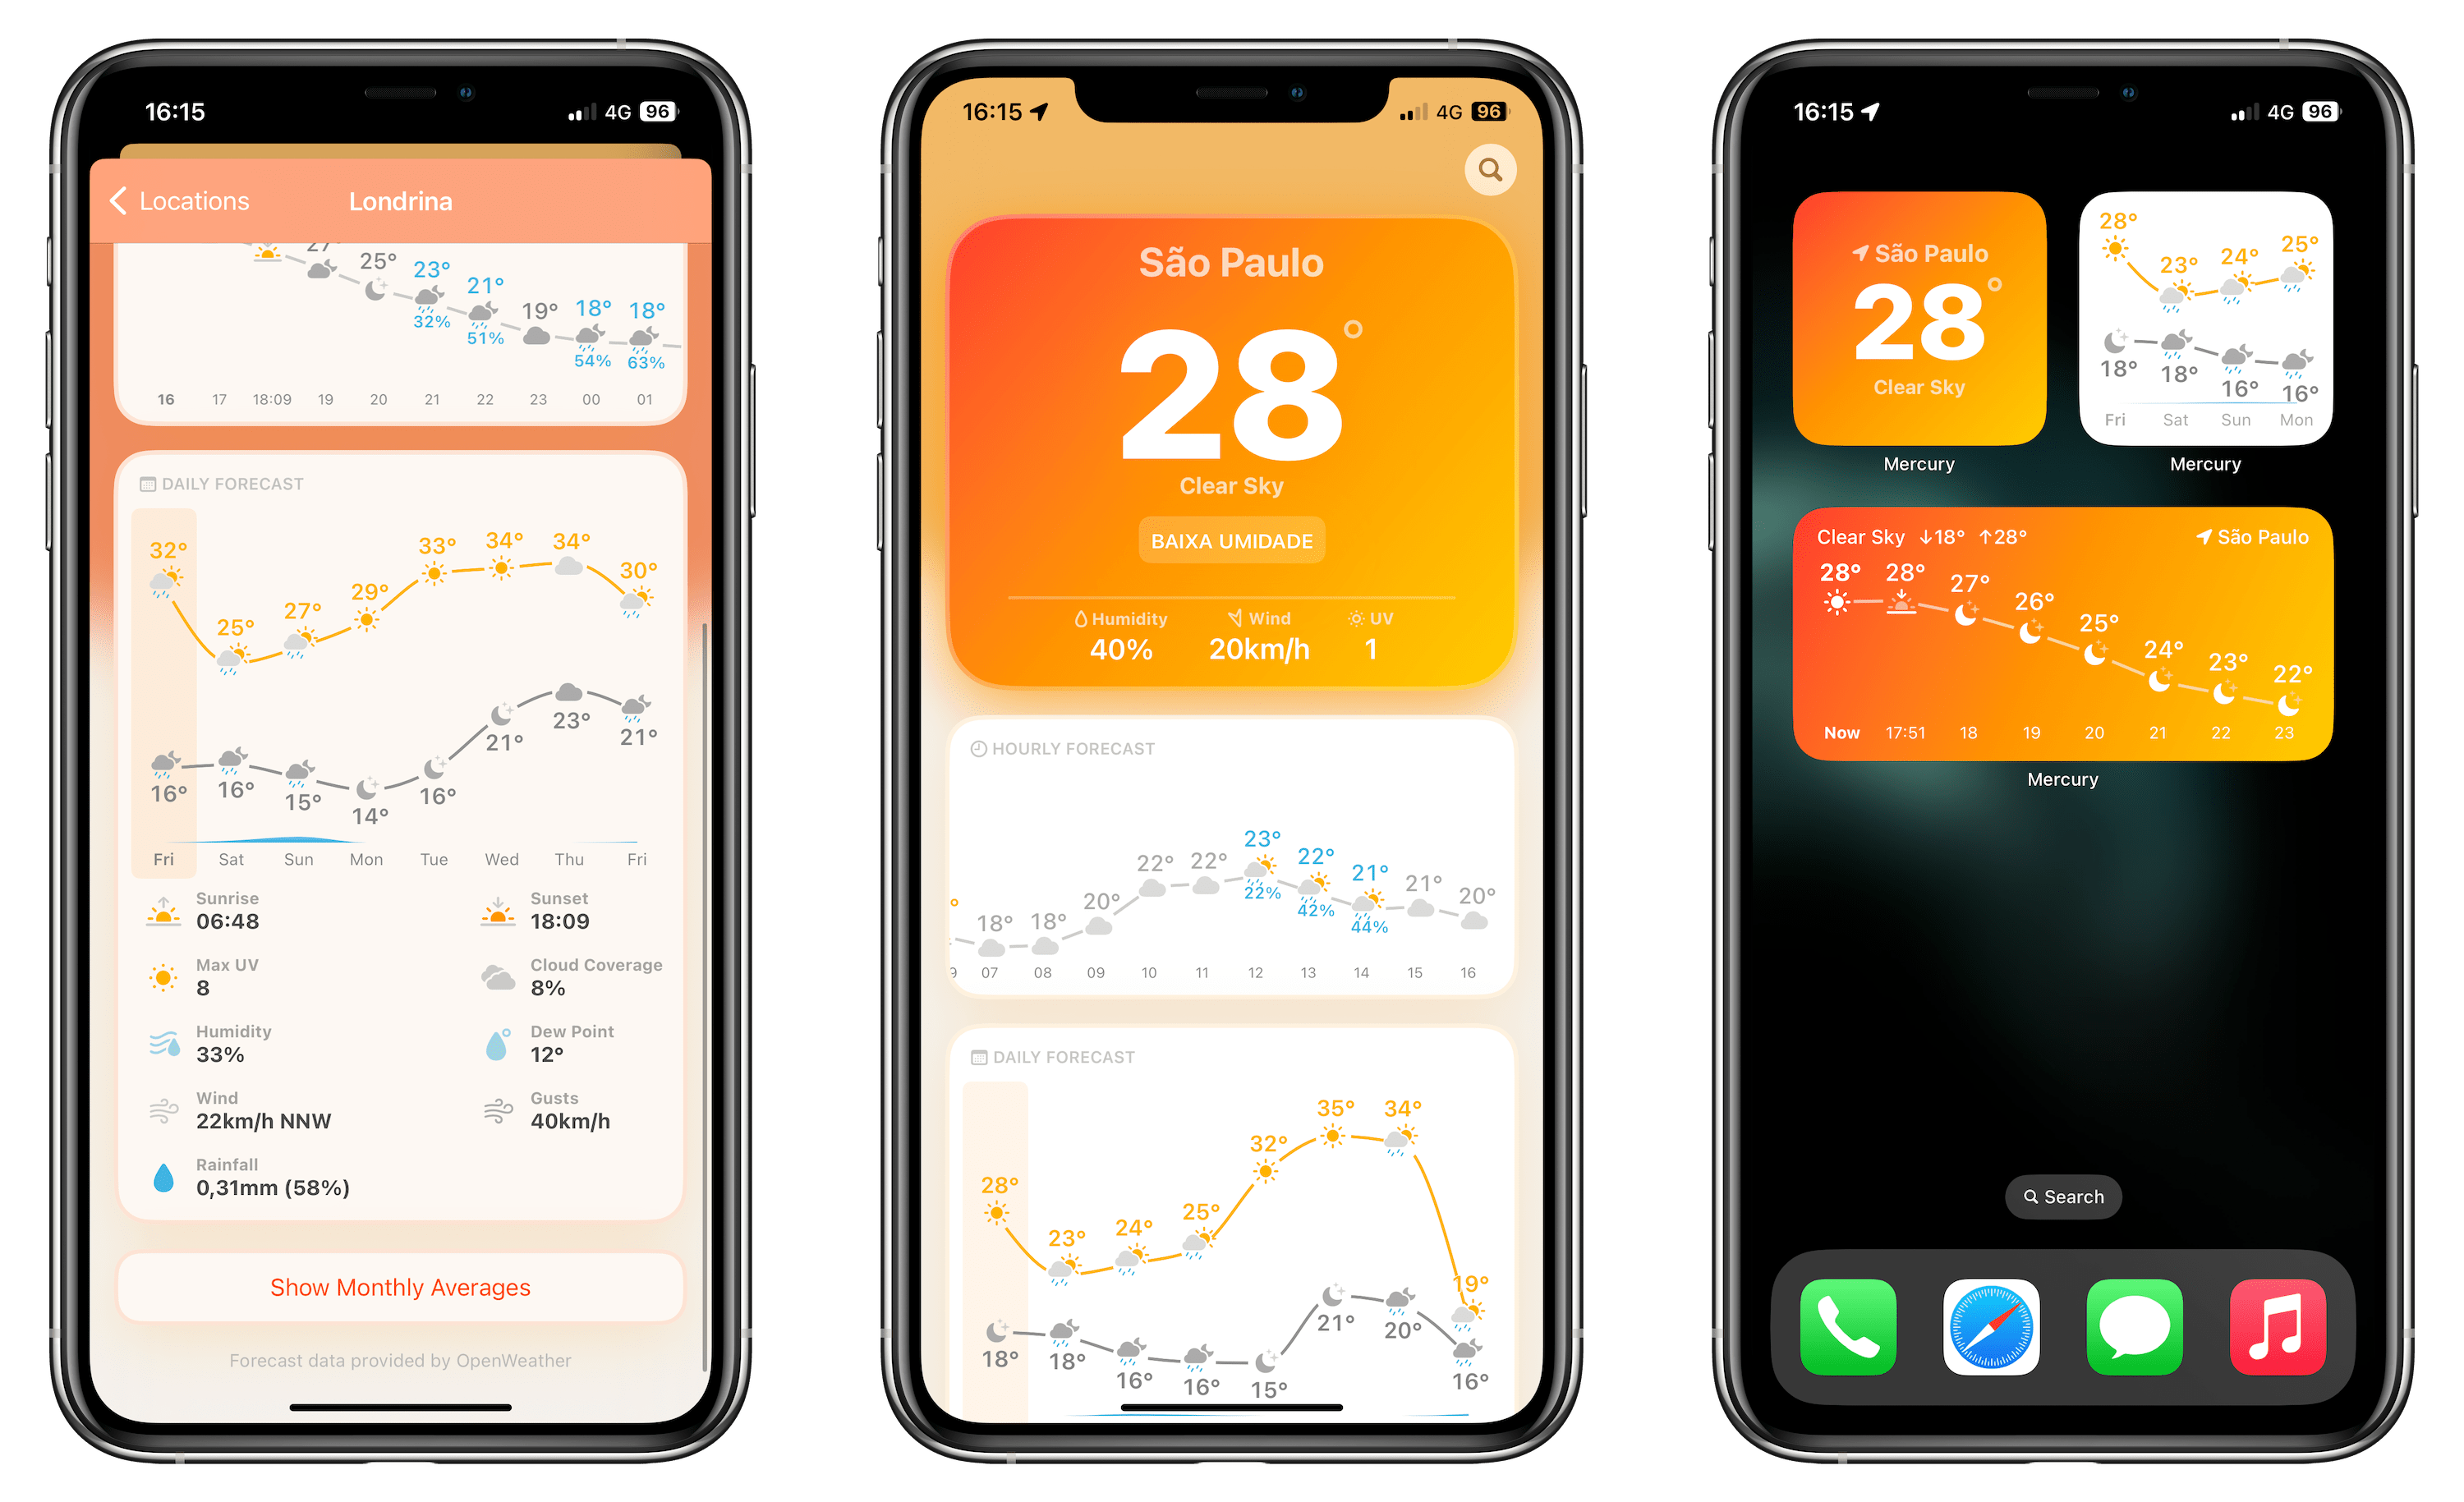 Mercury is a simple but elegant new weather app for Apple devices